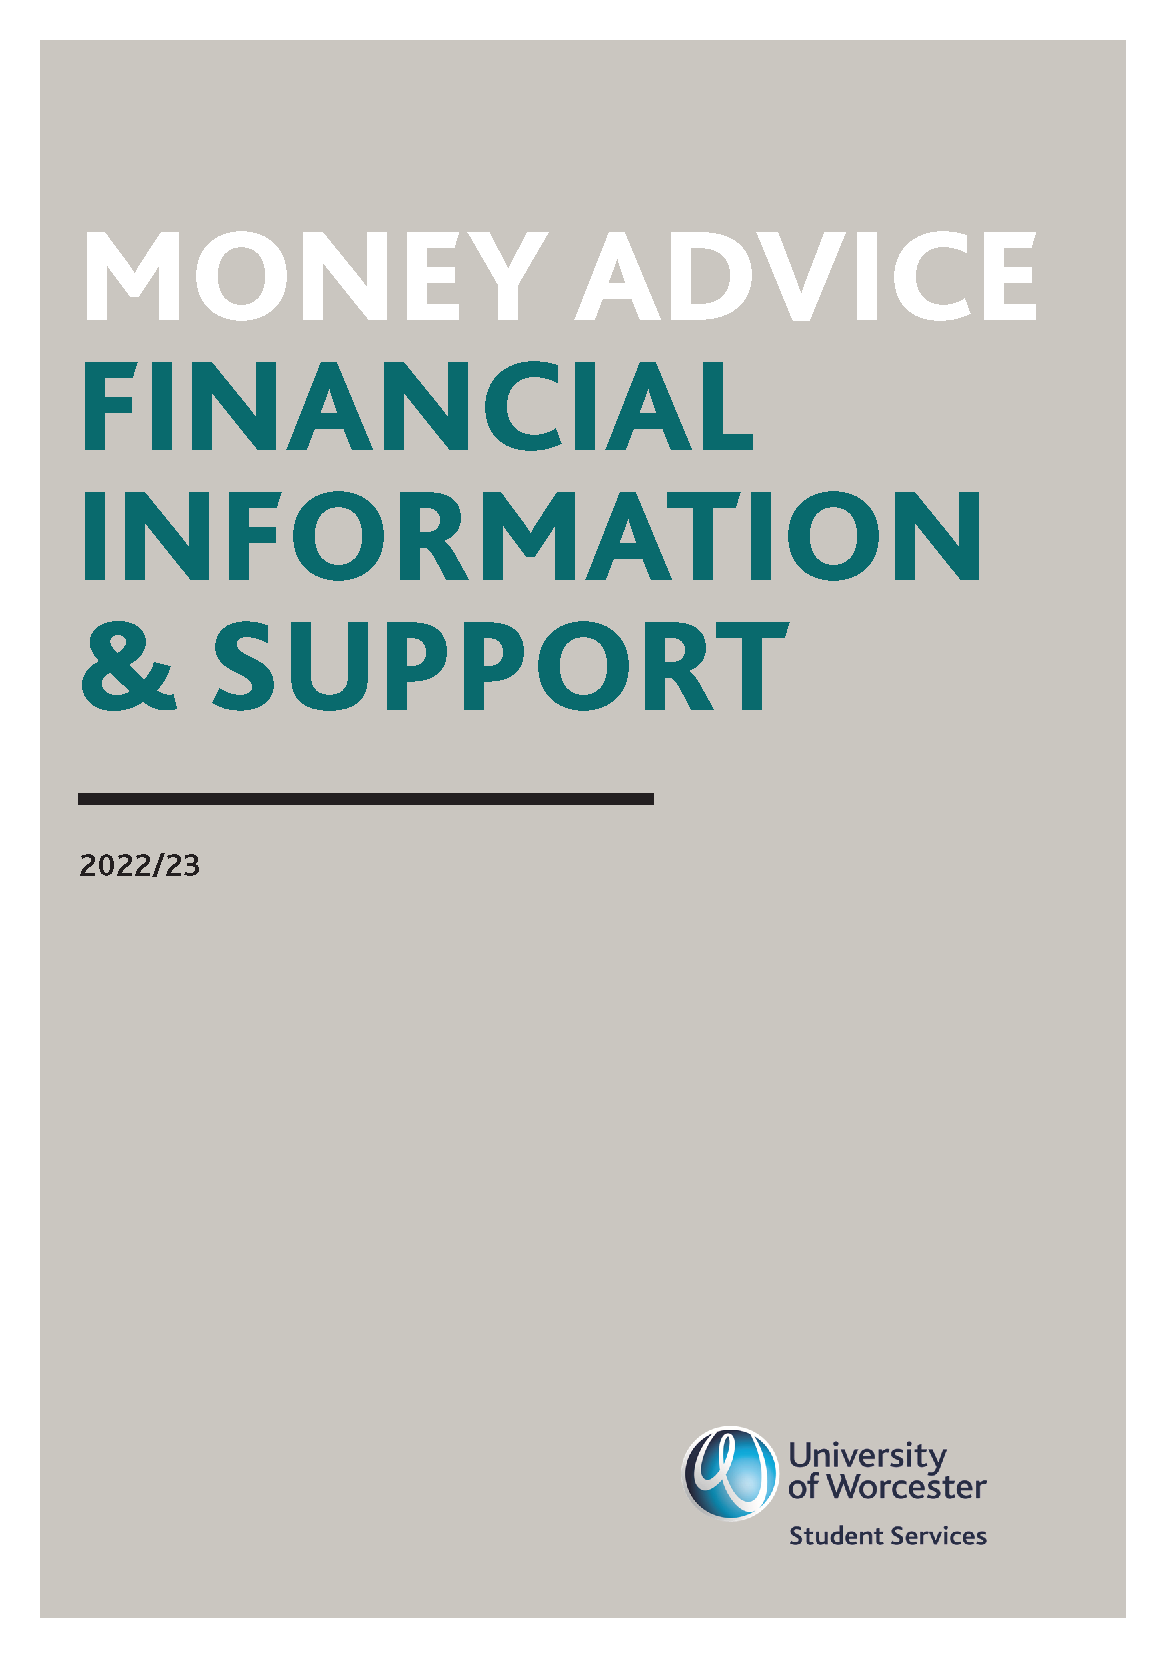 Money Advice Financial Information and Support Booklet